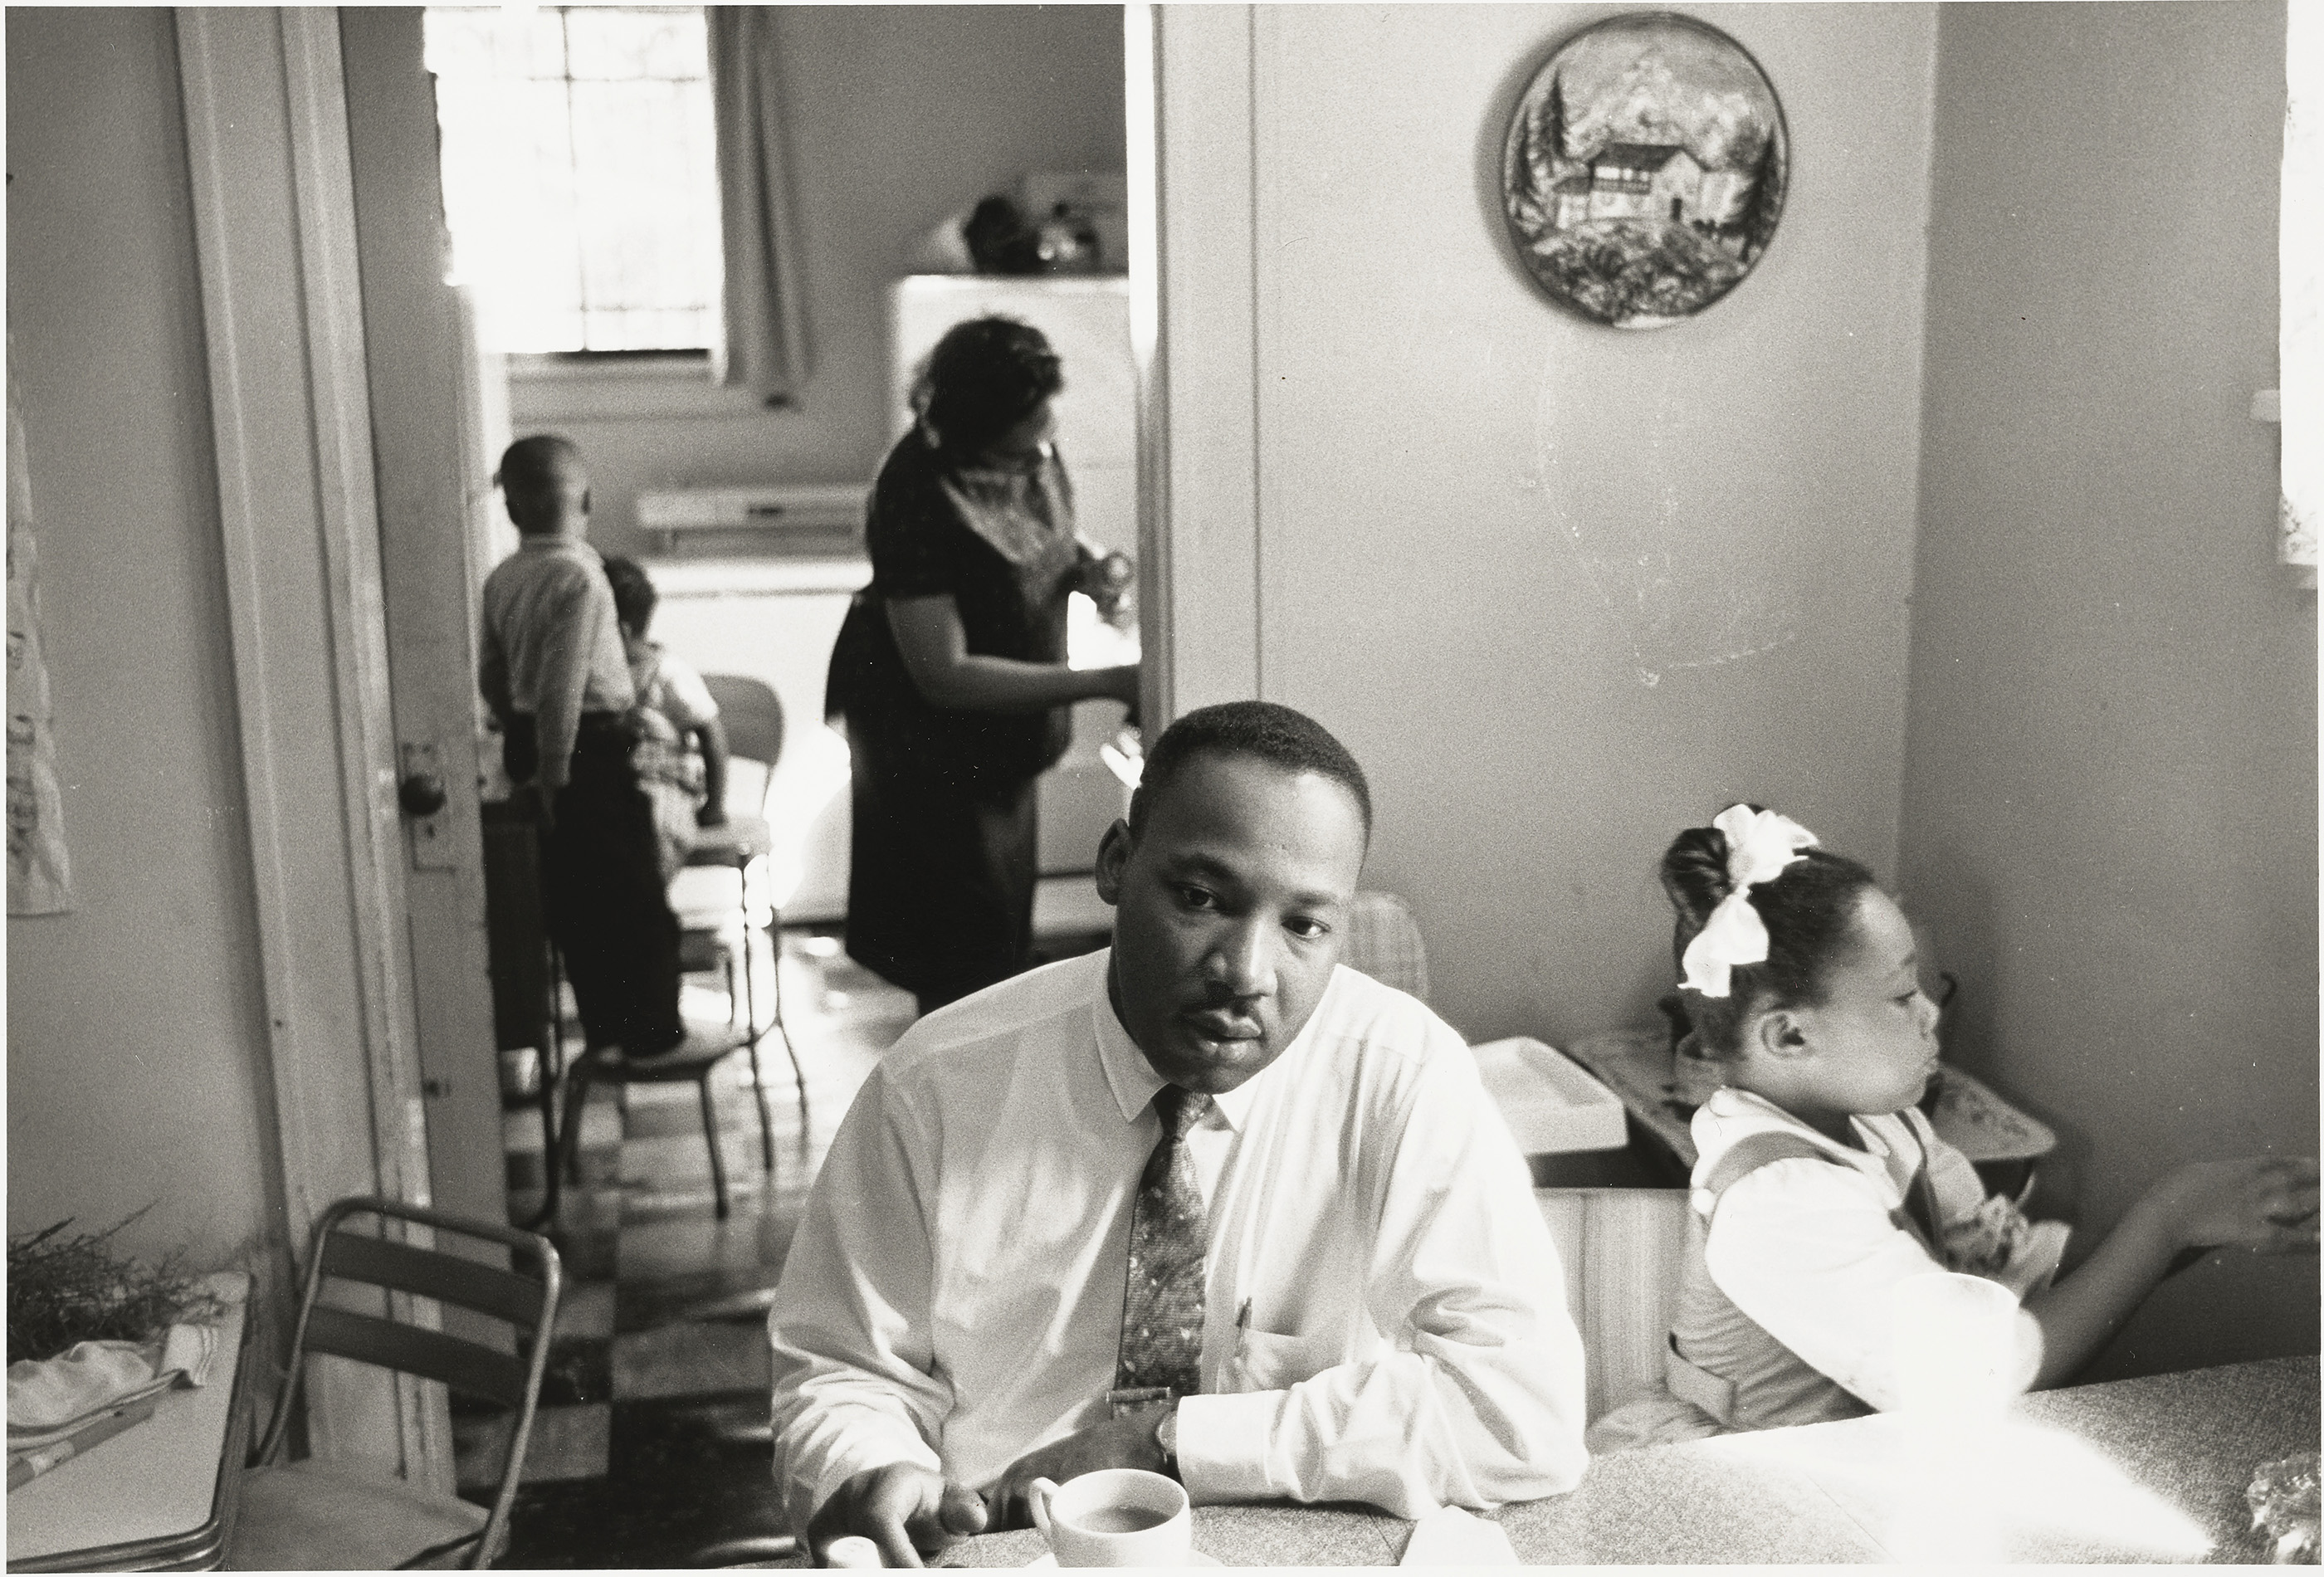 James Karales for Look magazine / Library of Congress (King at home with family, 563 Johnson Avenue, Atlanta, fall 1962)